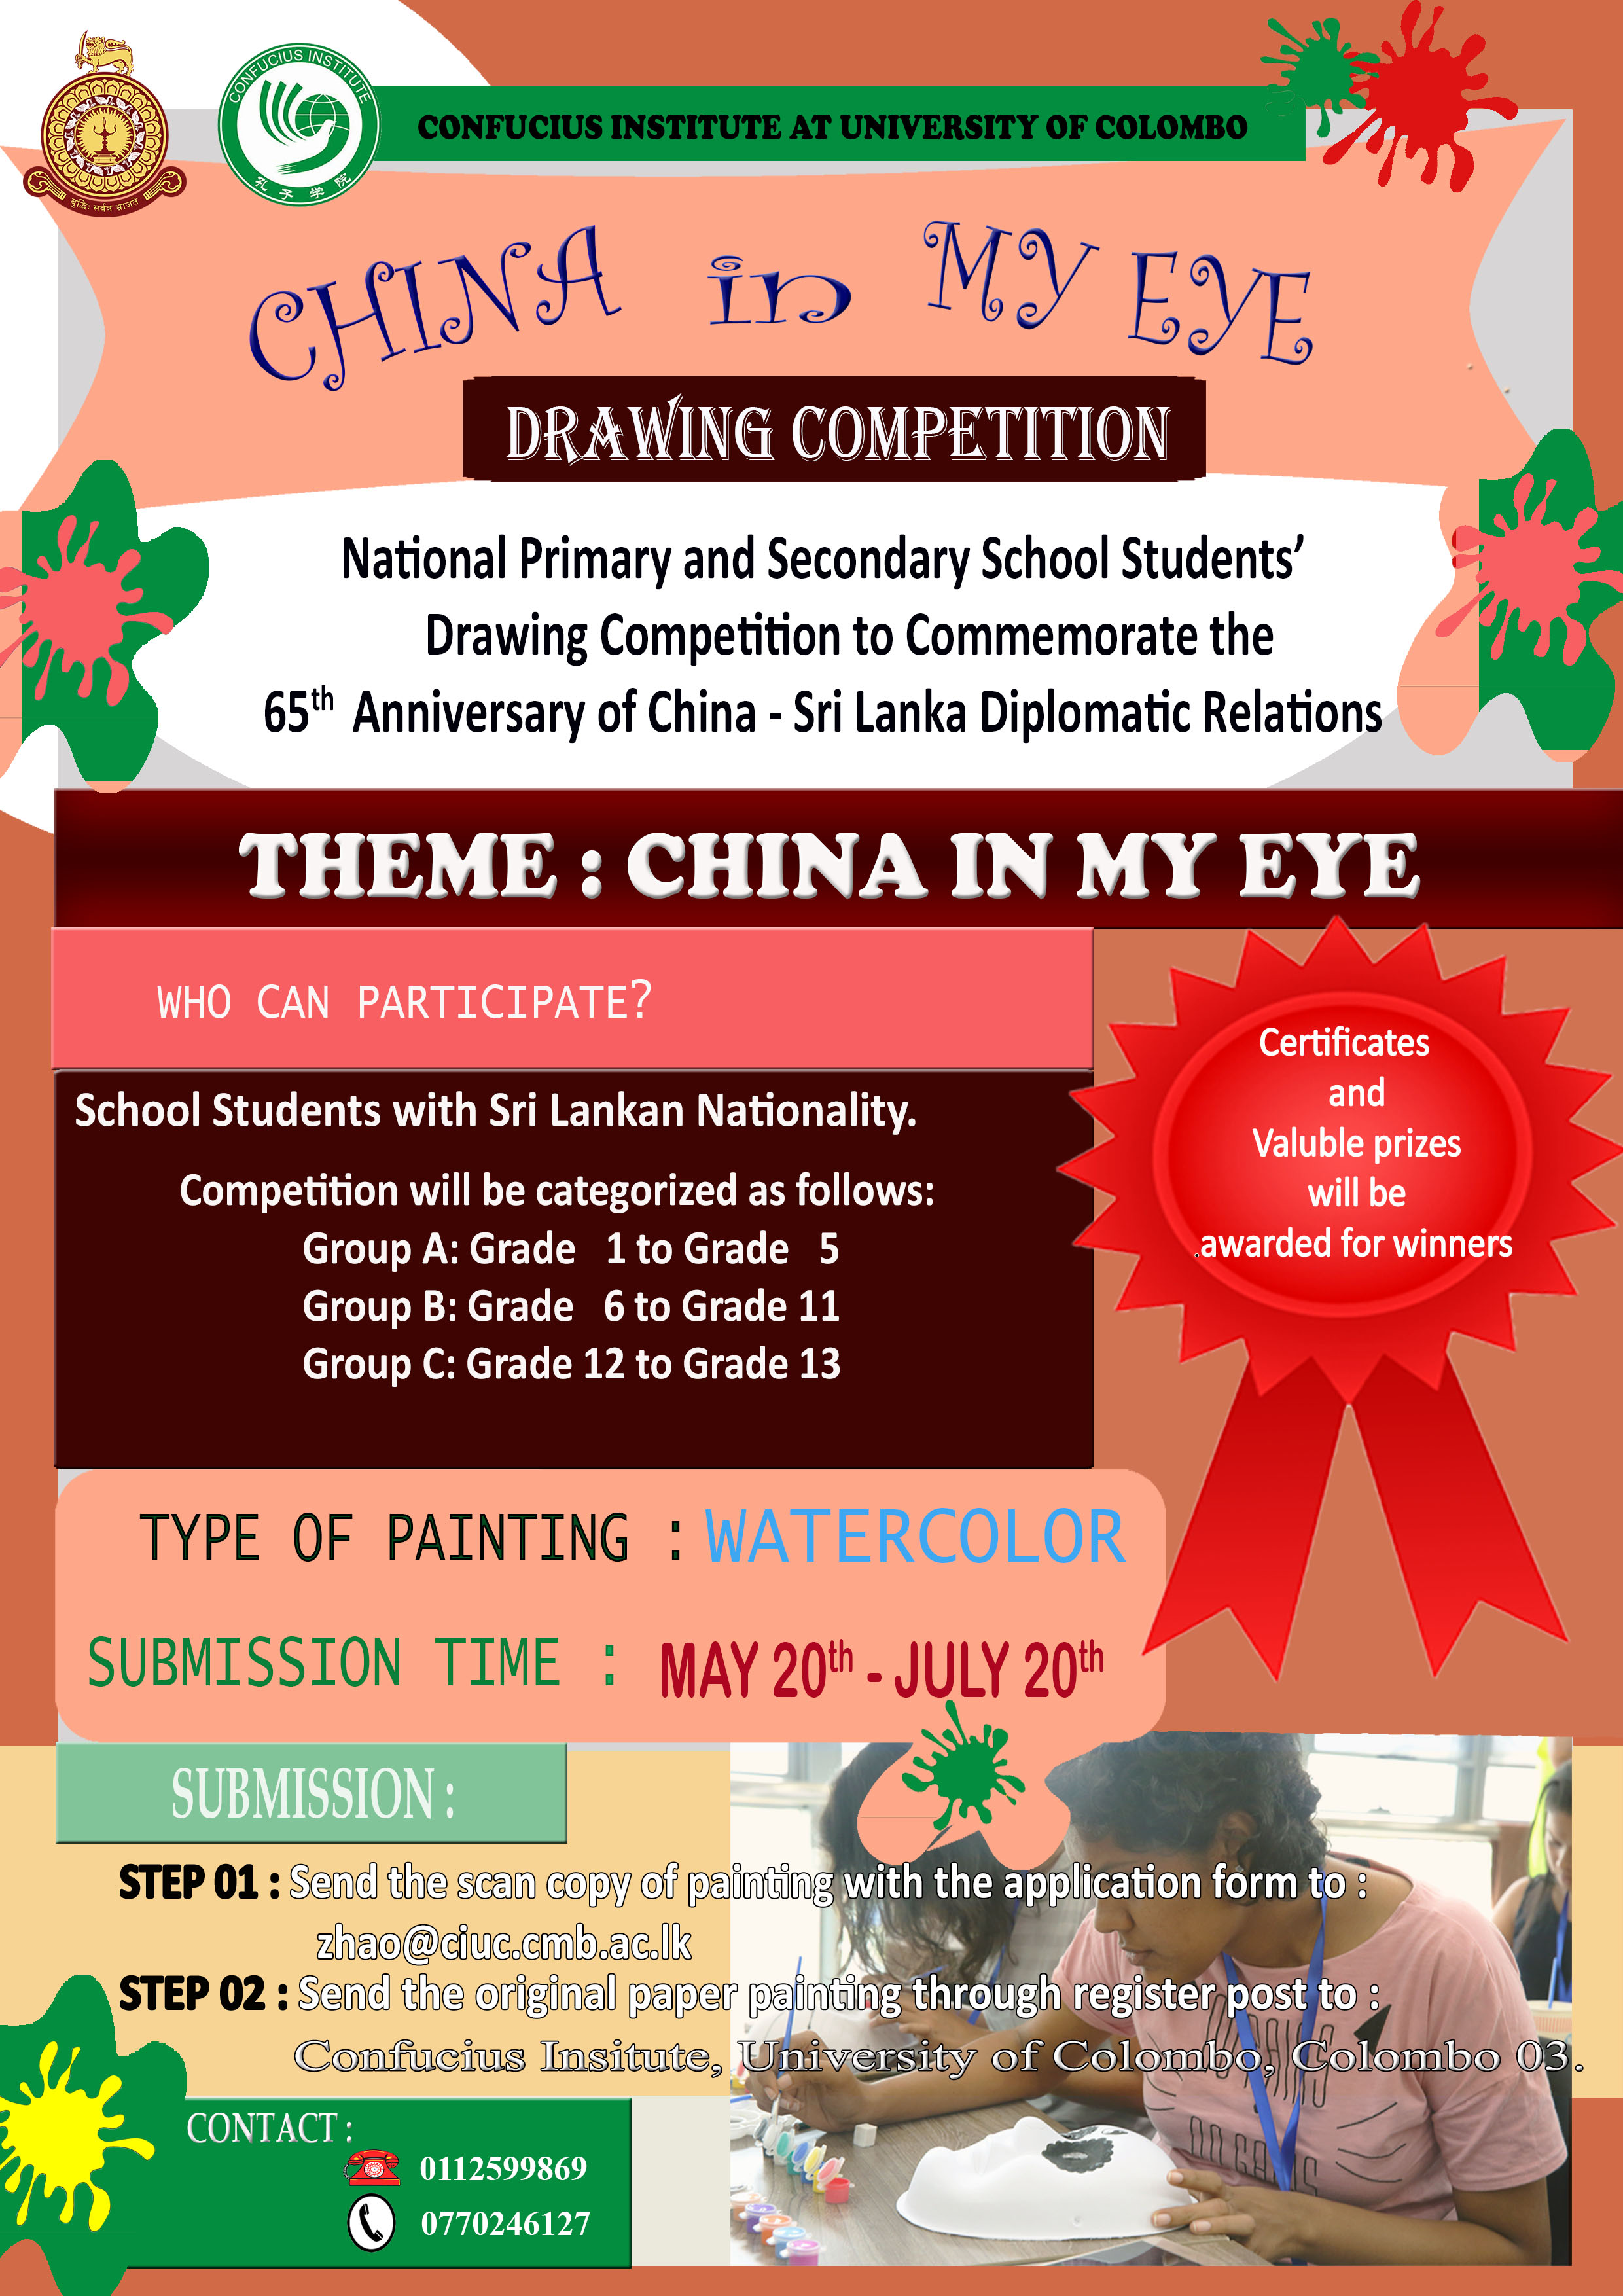 Drawing Competition to commemorate the 65th Anniversary of China – “CHINA IN MY EYE “